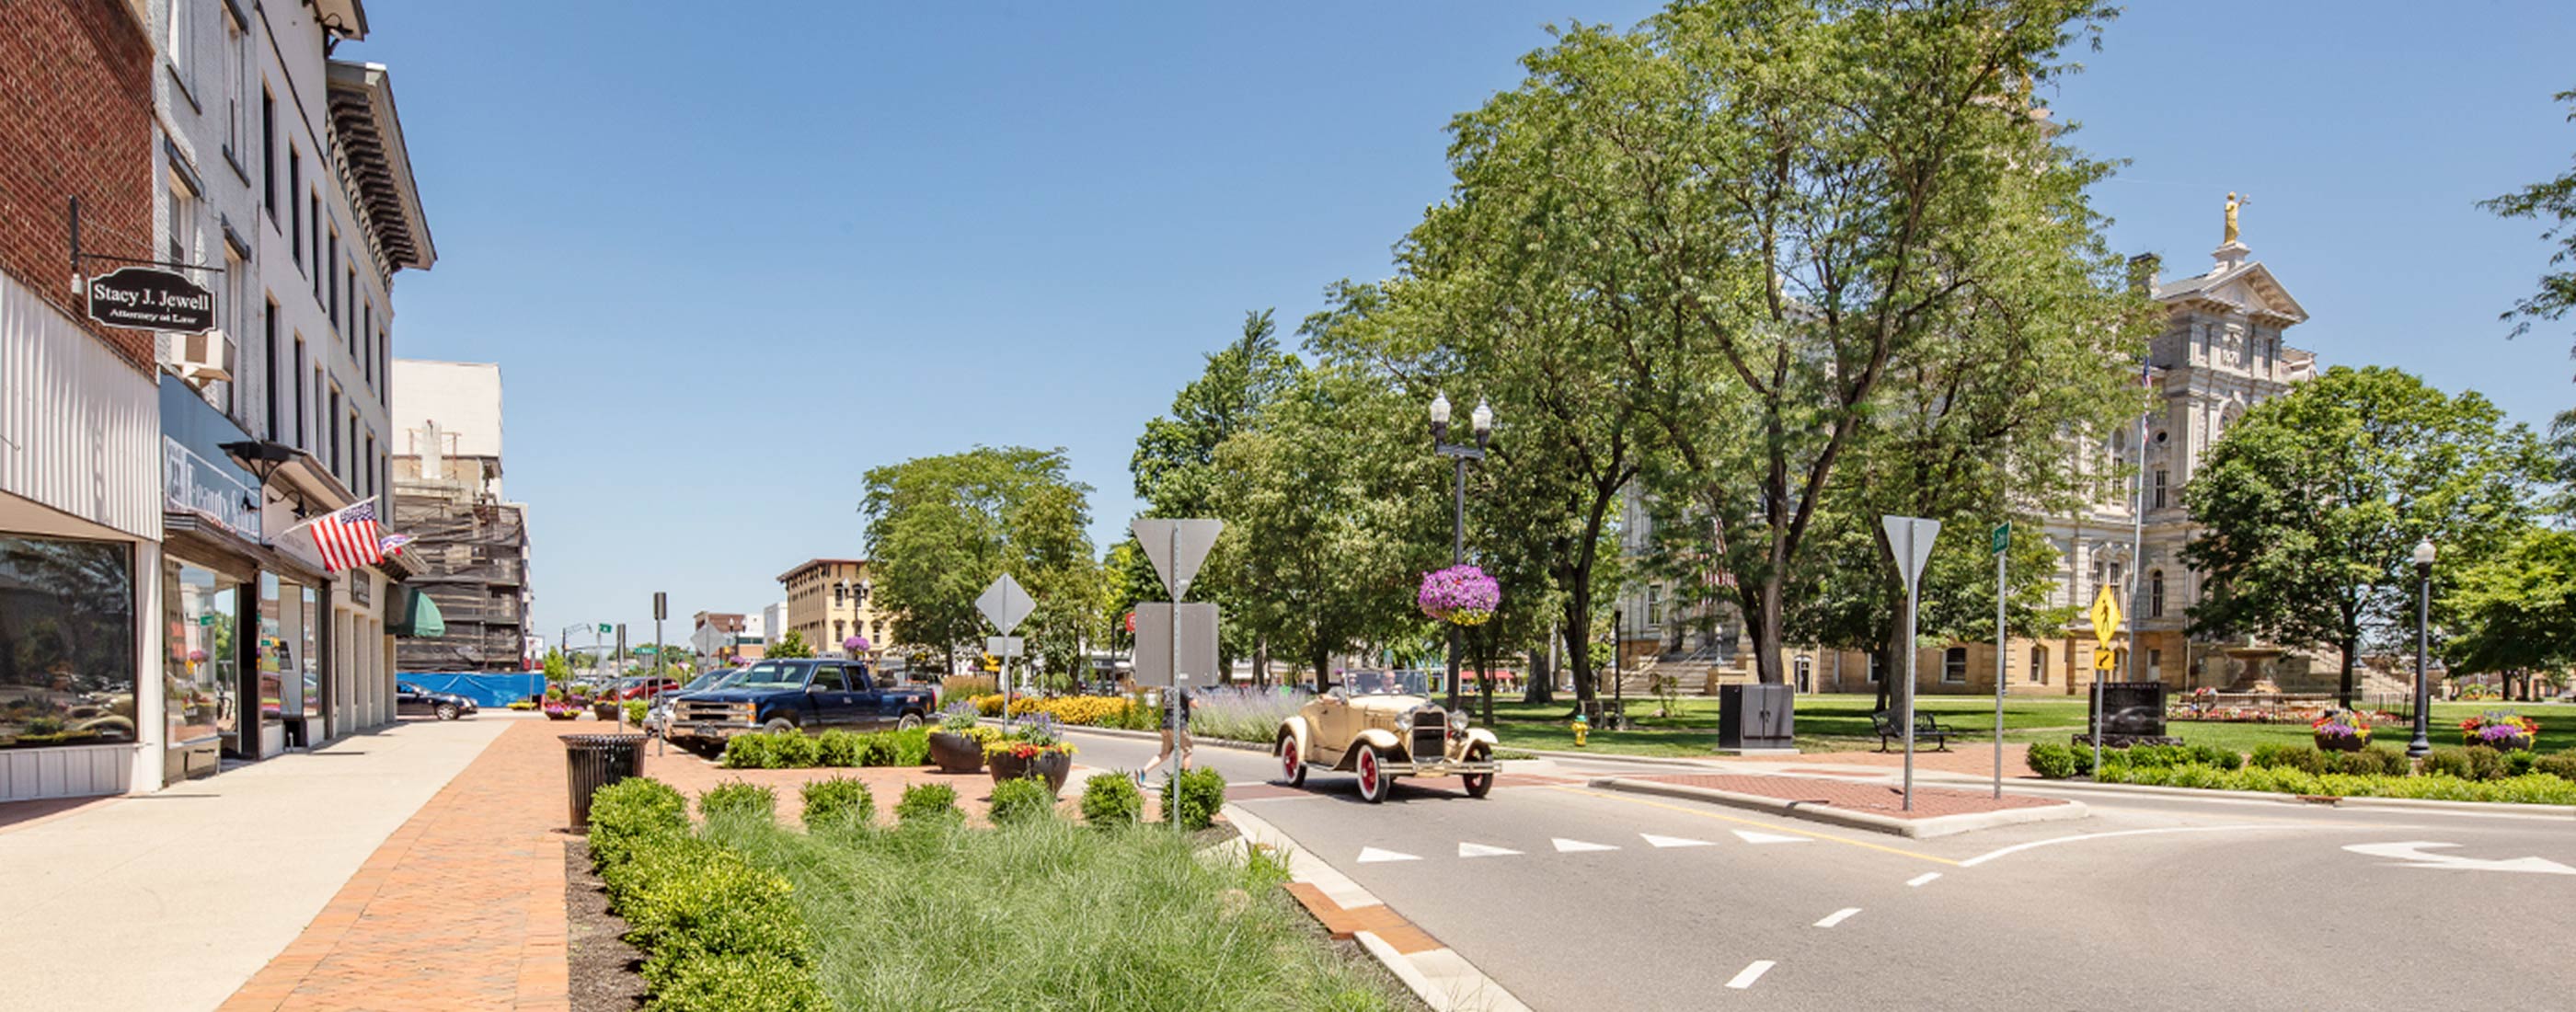 An old car drives through Newark, Ohio's roundabout and streetscape.